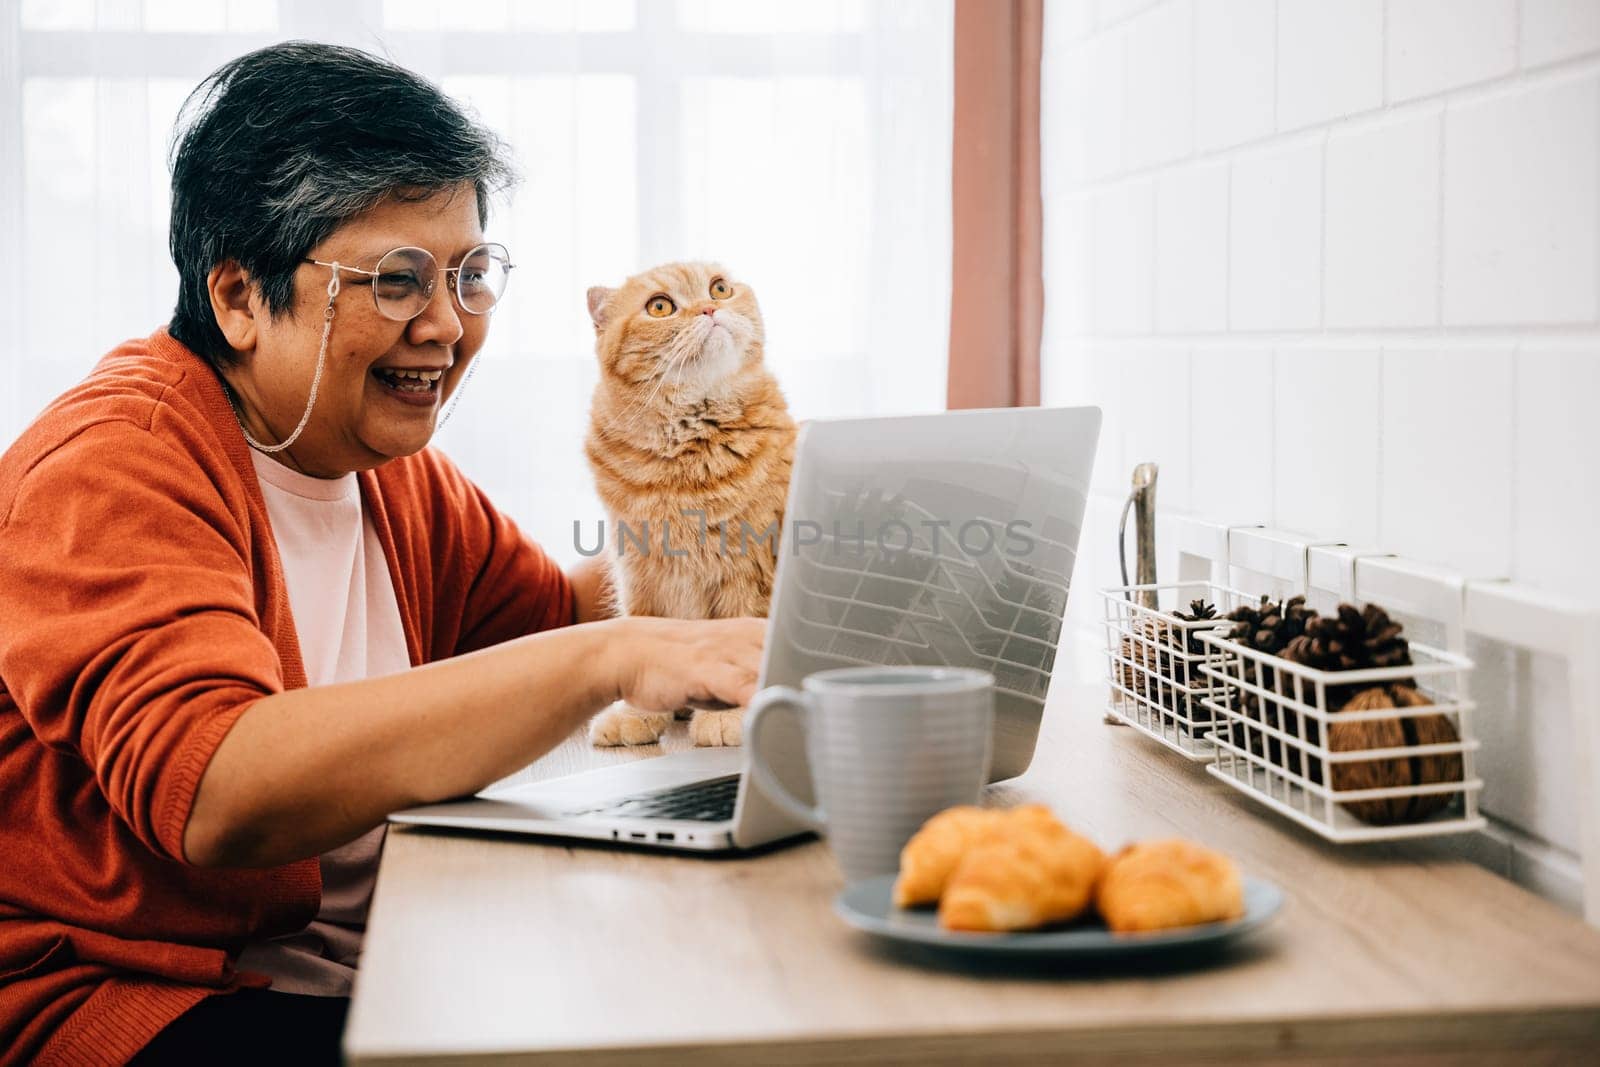 In the morning, a woman and her elderly cat share a moment of togetherness at the desk, as she works on her laptop. Their bond is a heartwarming example of owner-pet companionship. pet love by Sorapop